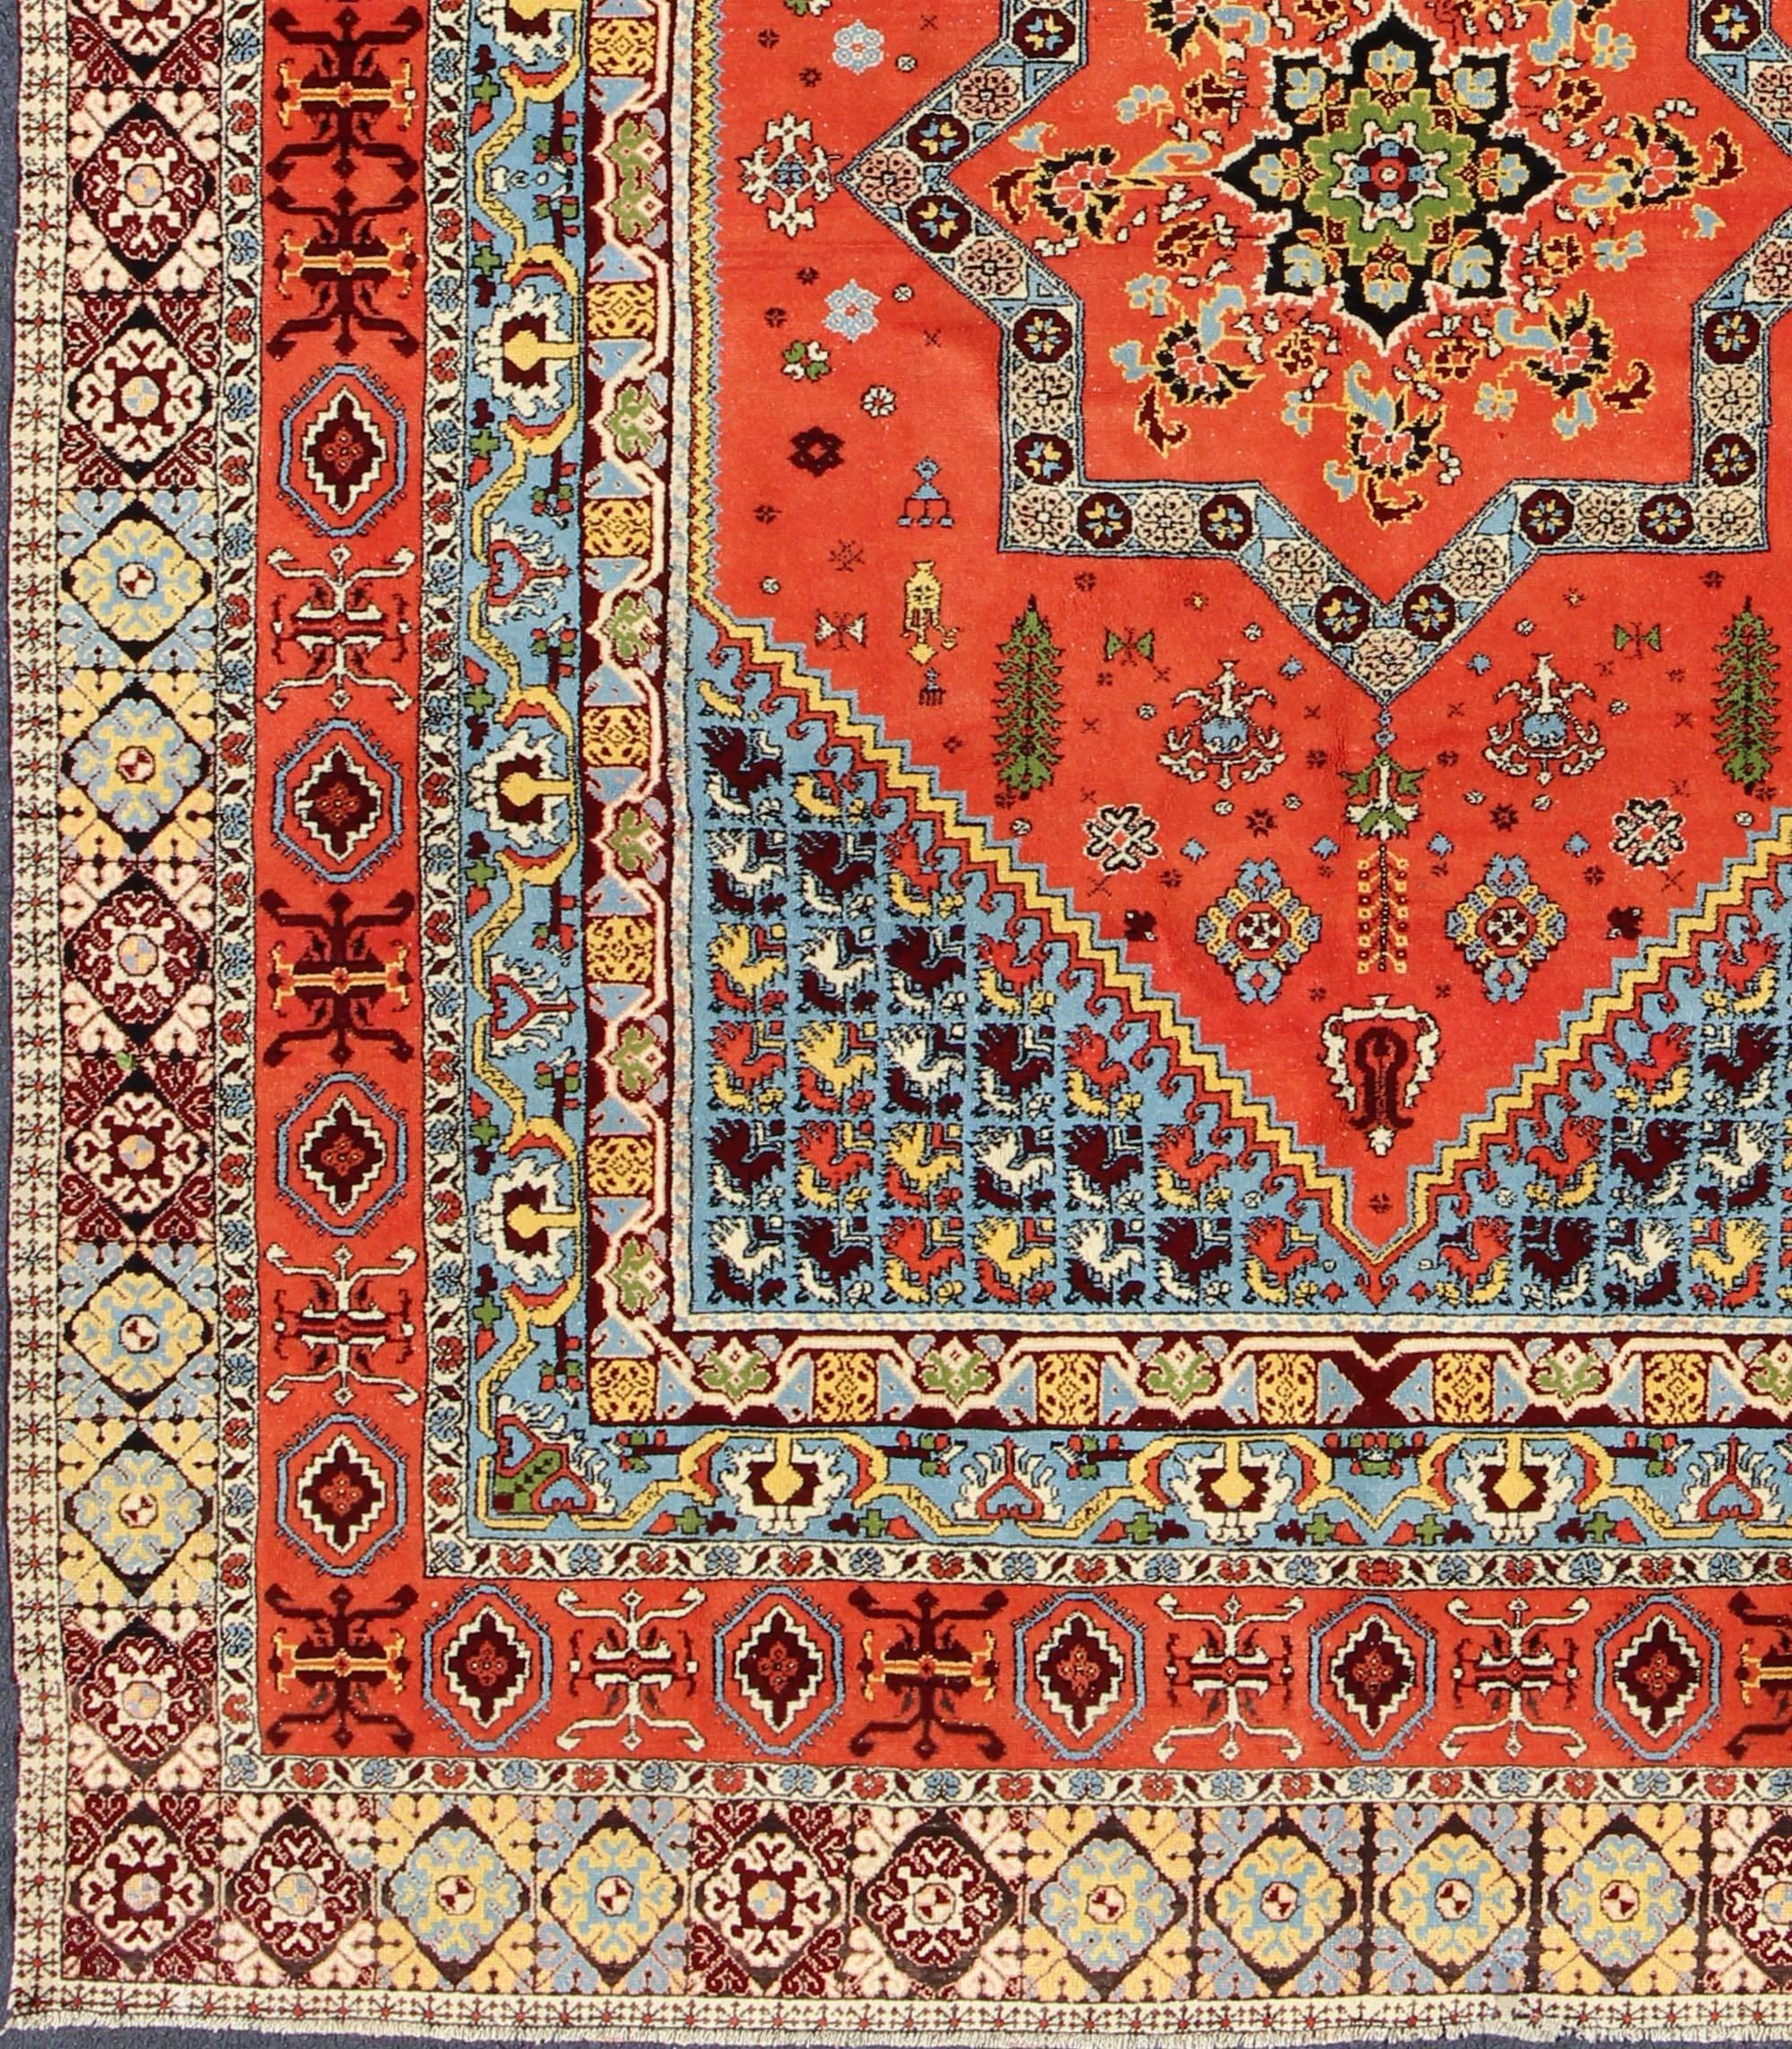 Large vintage Moroccan rug with central medallion design and tribal elements.
This large, vintage Moroccan rug is unique in its central medallion design. A star-shaped medallion is set in the field among various tribal shapes, which extend into the